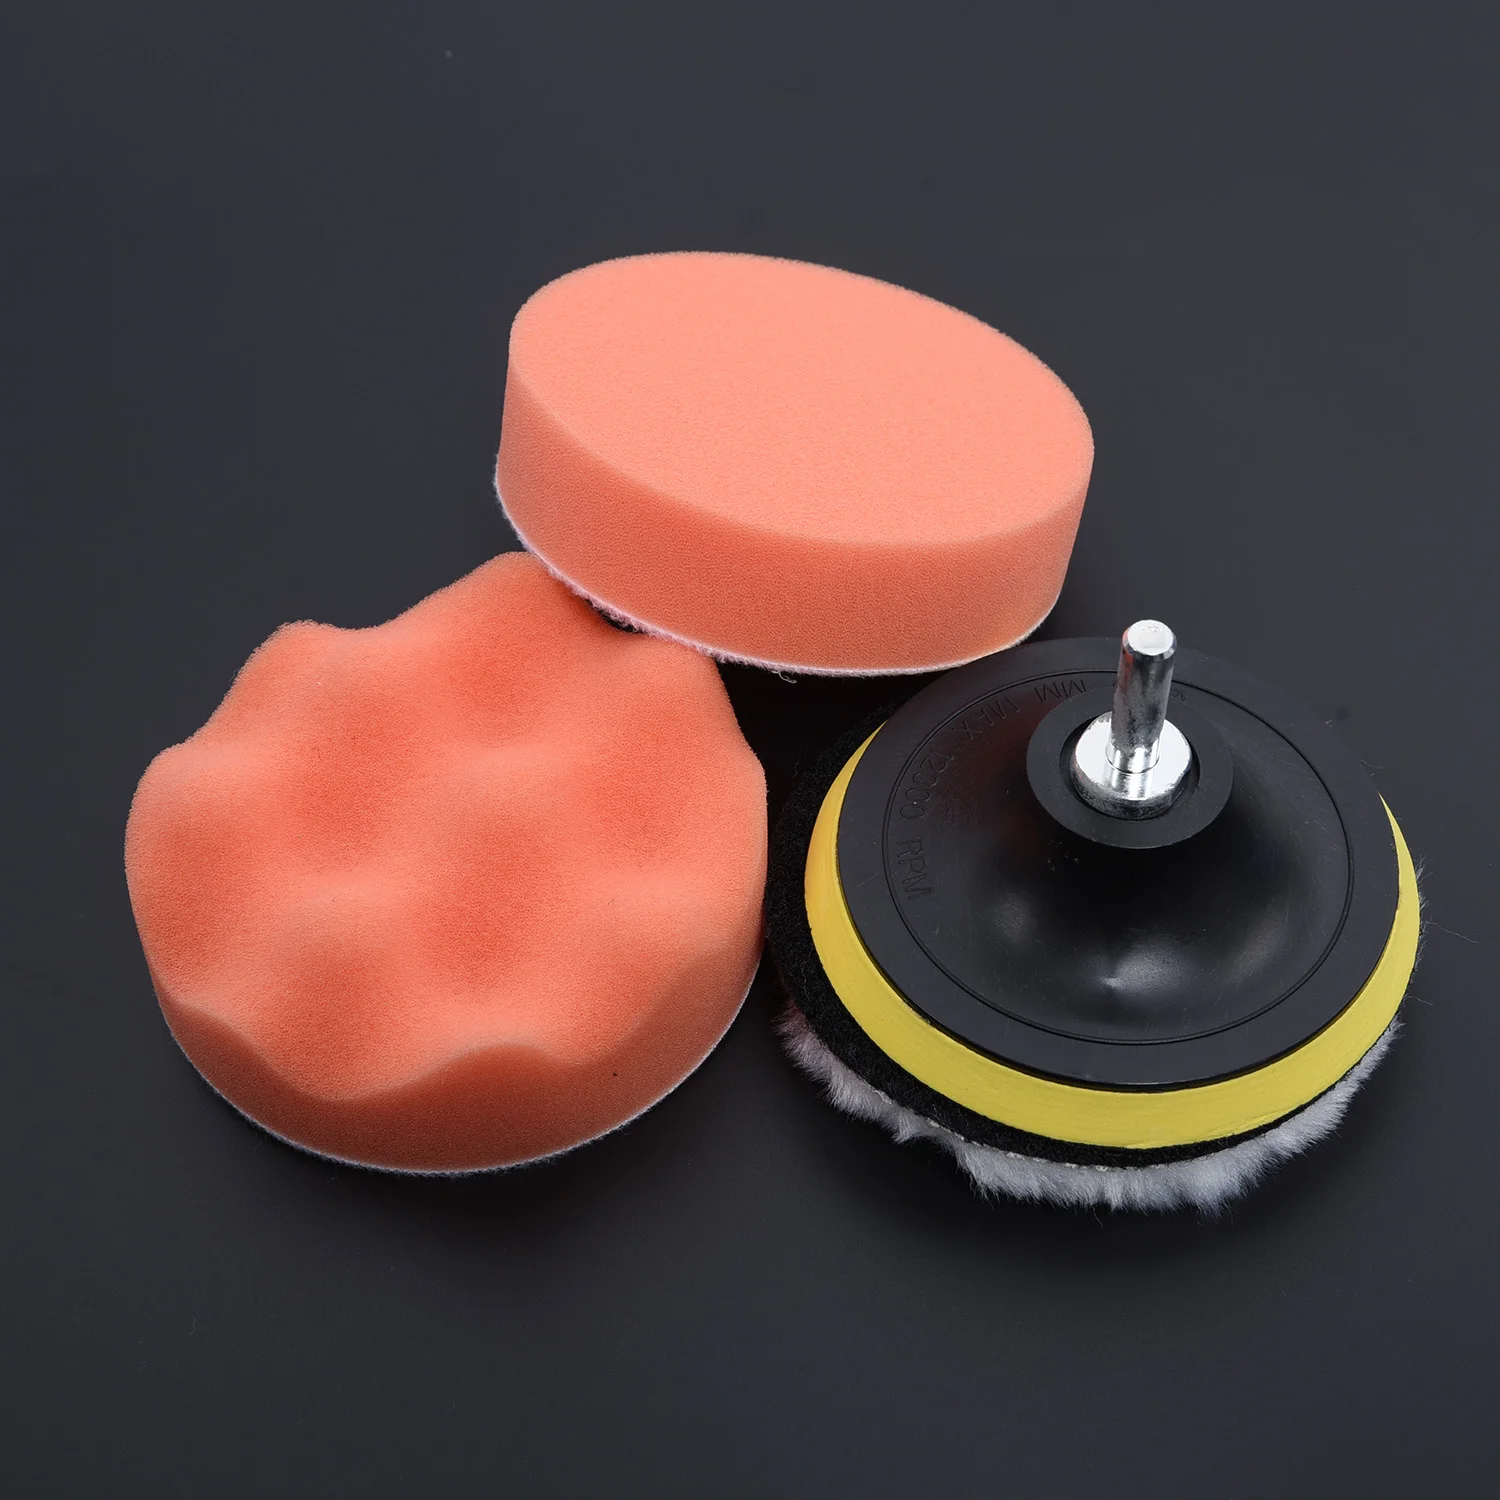 Pad Sponge Adapter Car Polishing Kit Cleaning Compound Foam Auto Buffing Polisher Drill Sander Washing Waxing Tools car polishing pads foam buffing waxing sandpaper set for auto motorcycle vehicle cleaning tools wool wheel disc